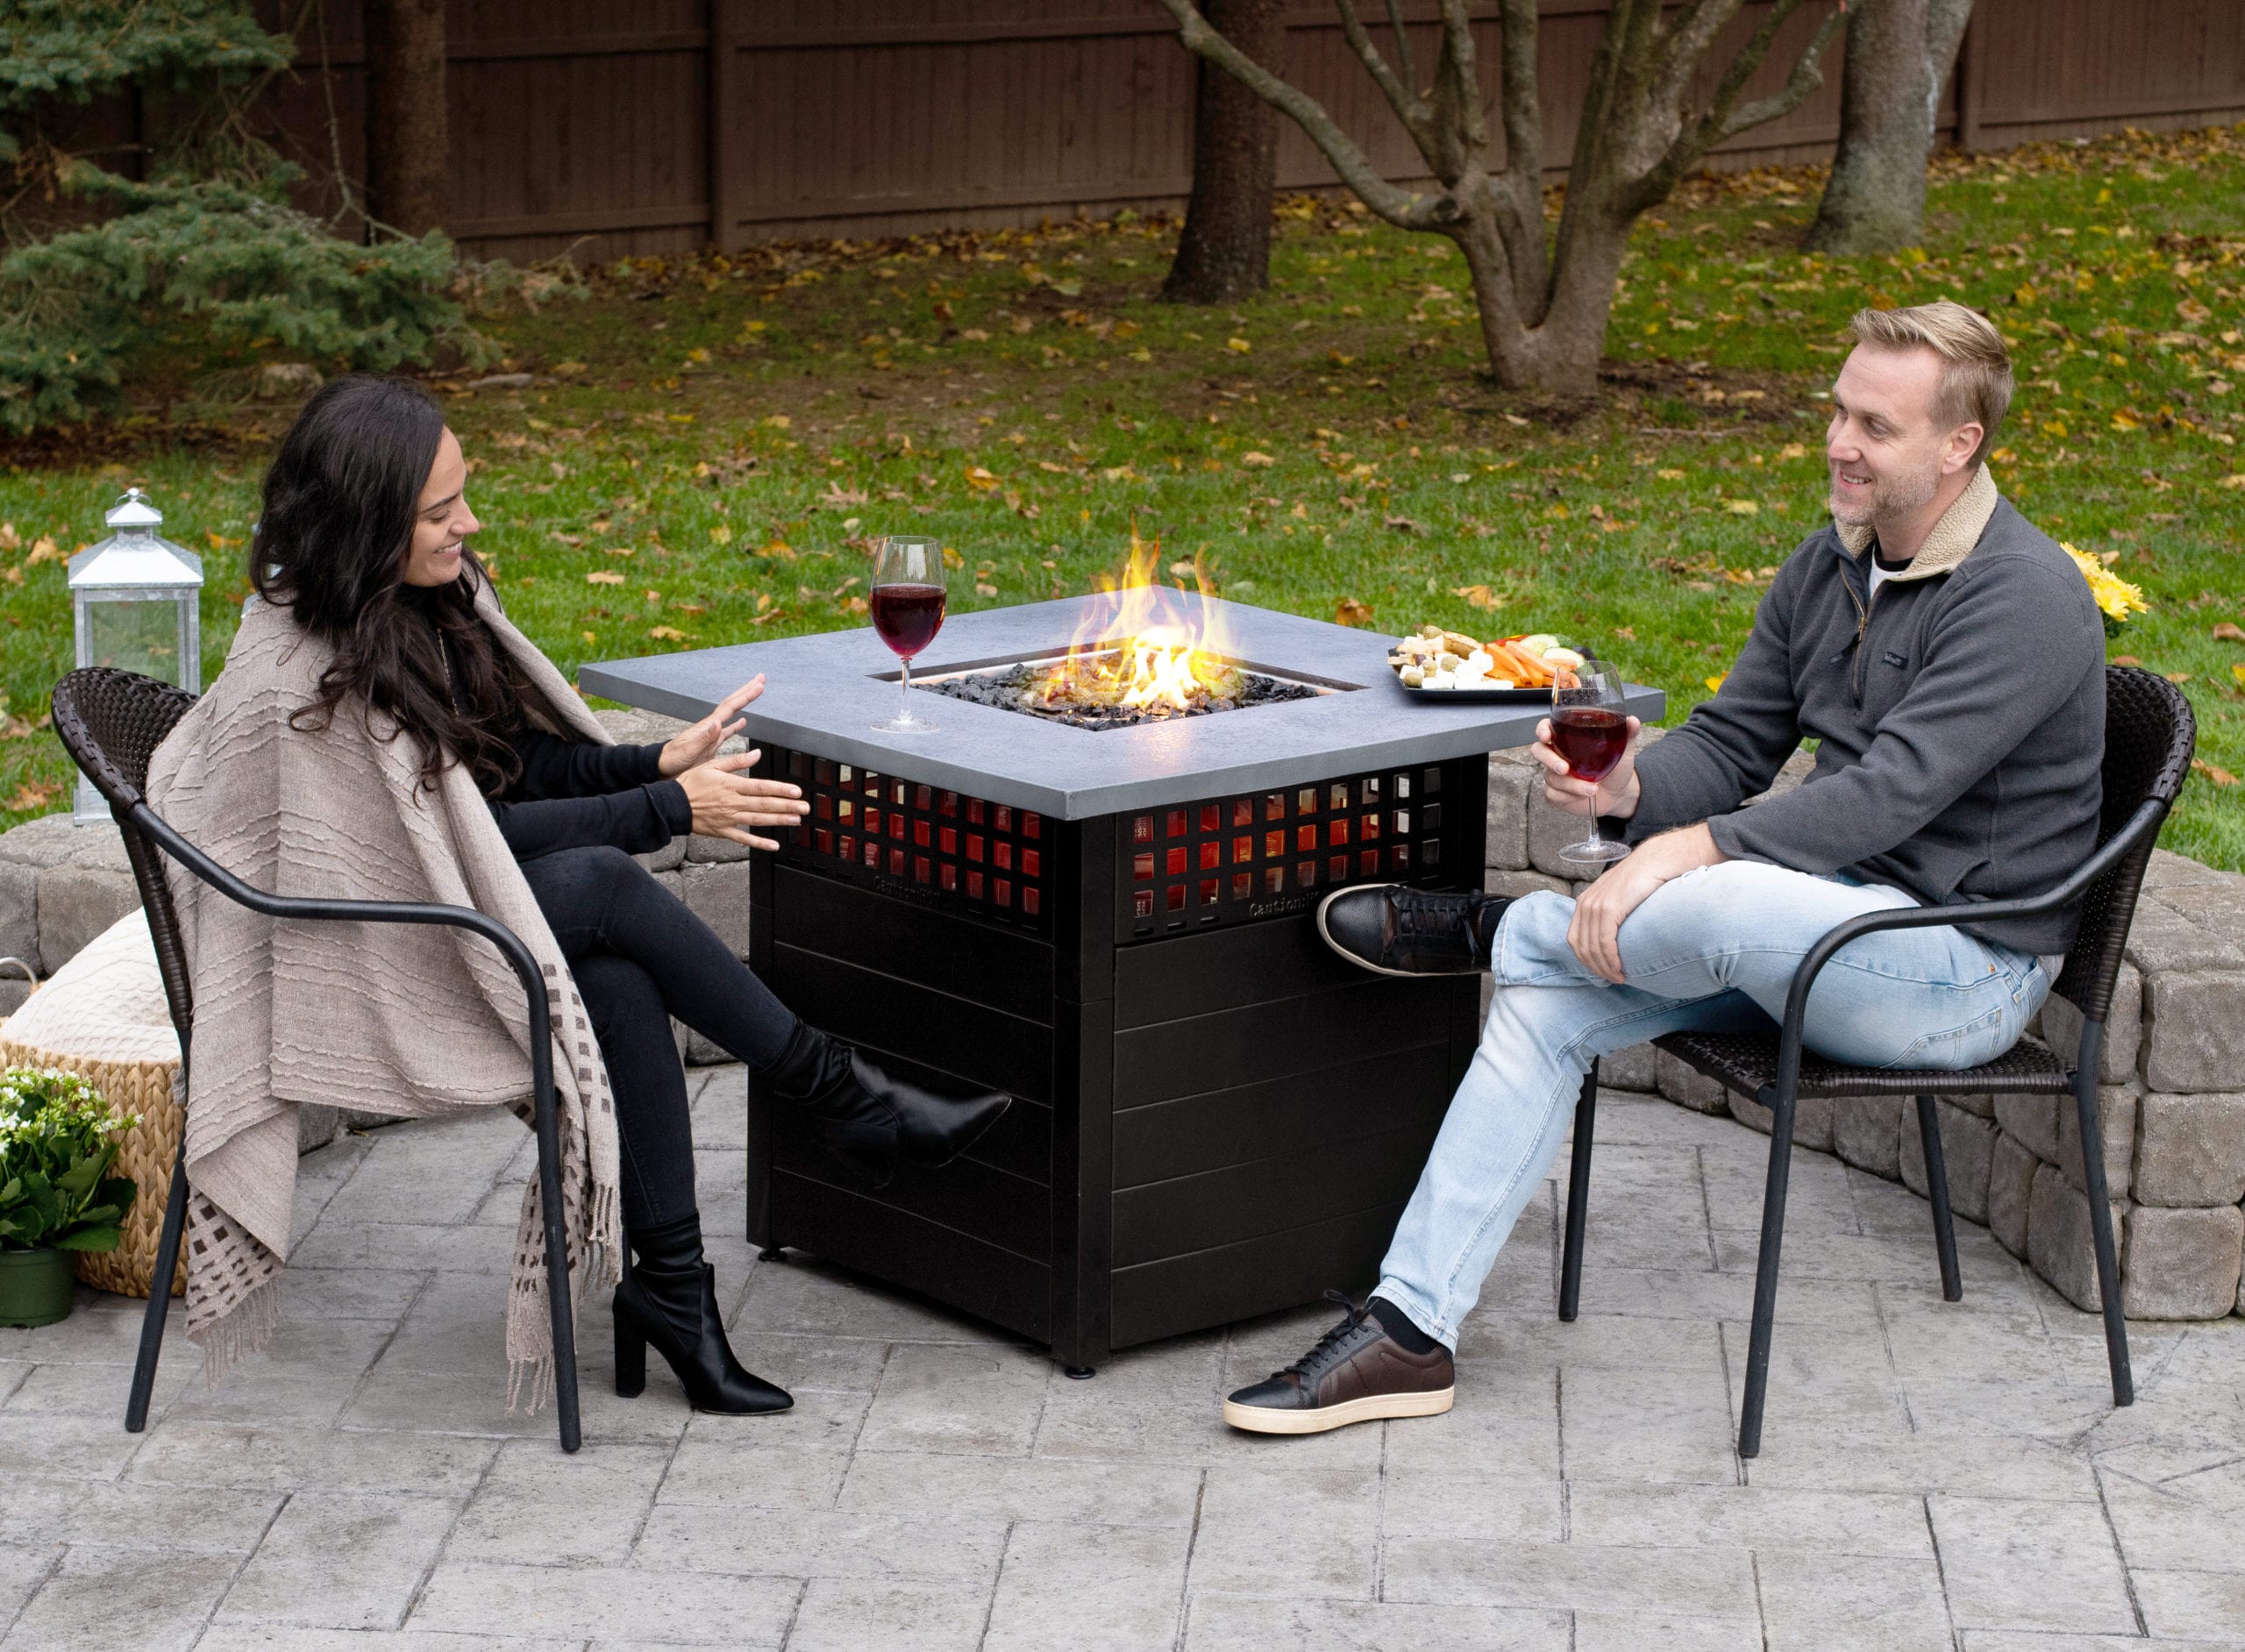 The Daniel Lp Gas Outdoor Fire Pit, Camp Chef Patio Cover For Monterey Fire Pit